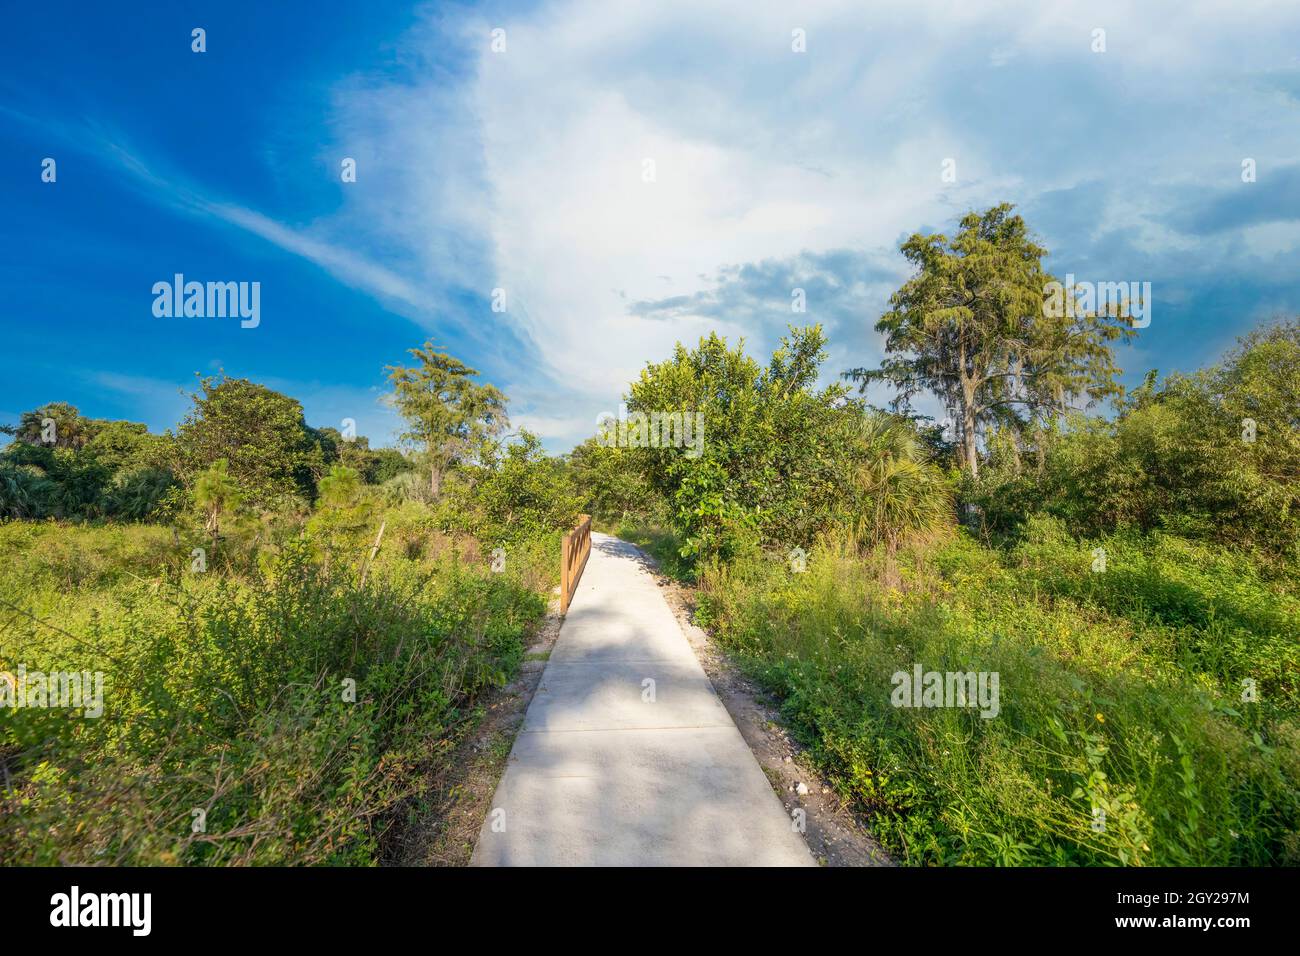 One of the many nature trails in Everglades National Park that take you through the wetlands and forests of the 'glades. It's both fun and educational. Stock Photo